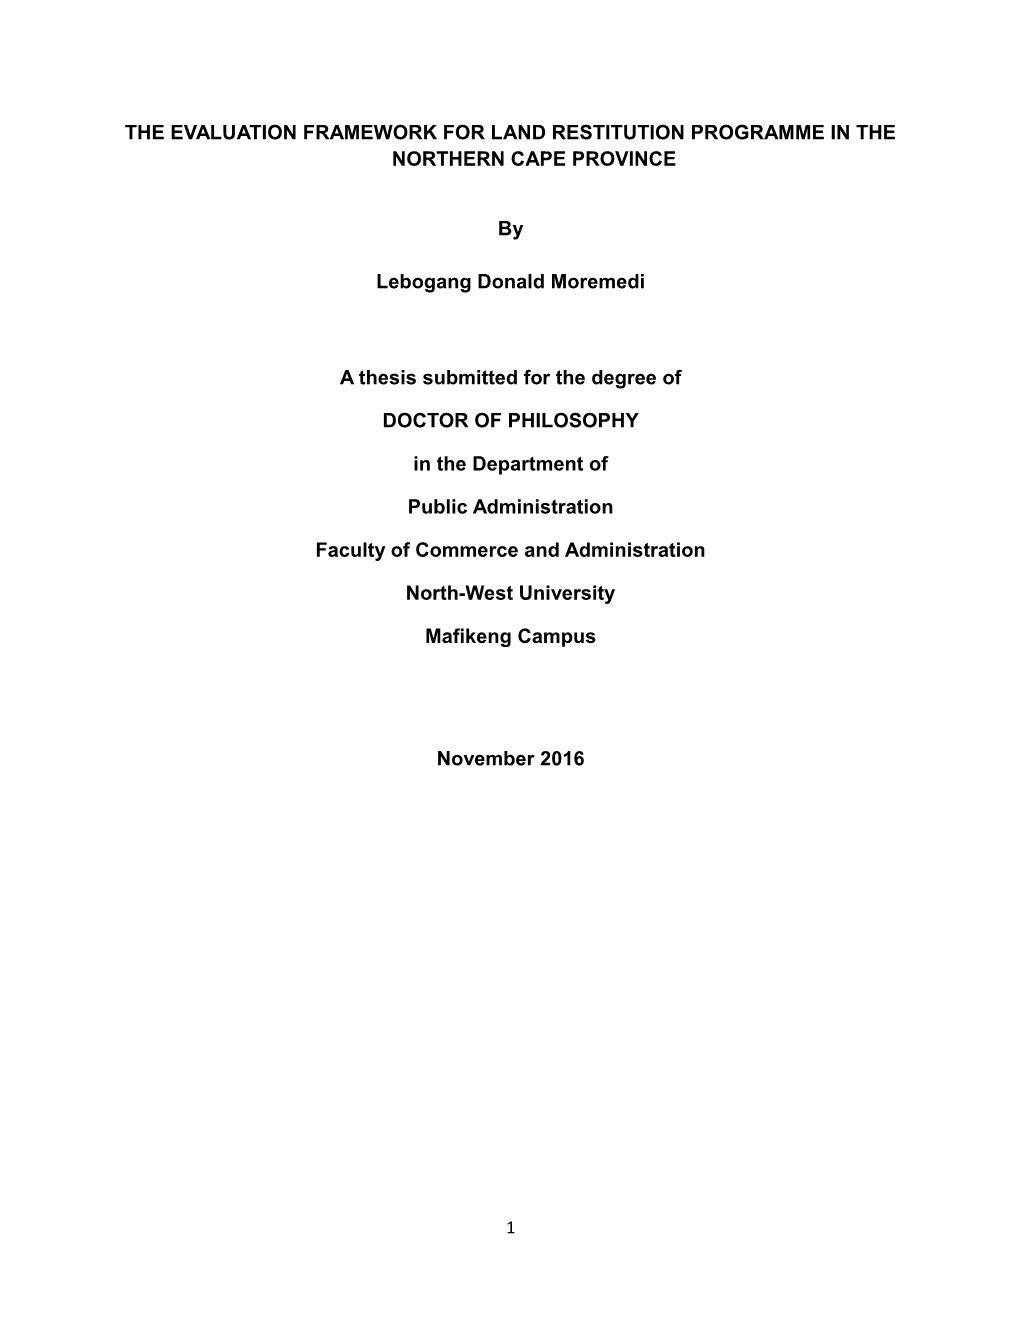 THE EVALUATION FRAMEWORK for LAND RESTITUTION PROGRAMME in the NORTHERN CAPE PROVINCE by Lebogang Donald Moremedi a Thesis Submi